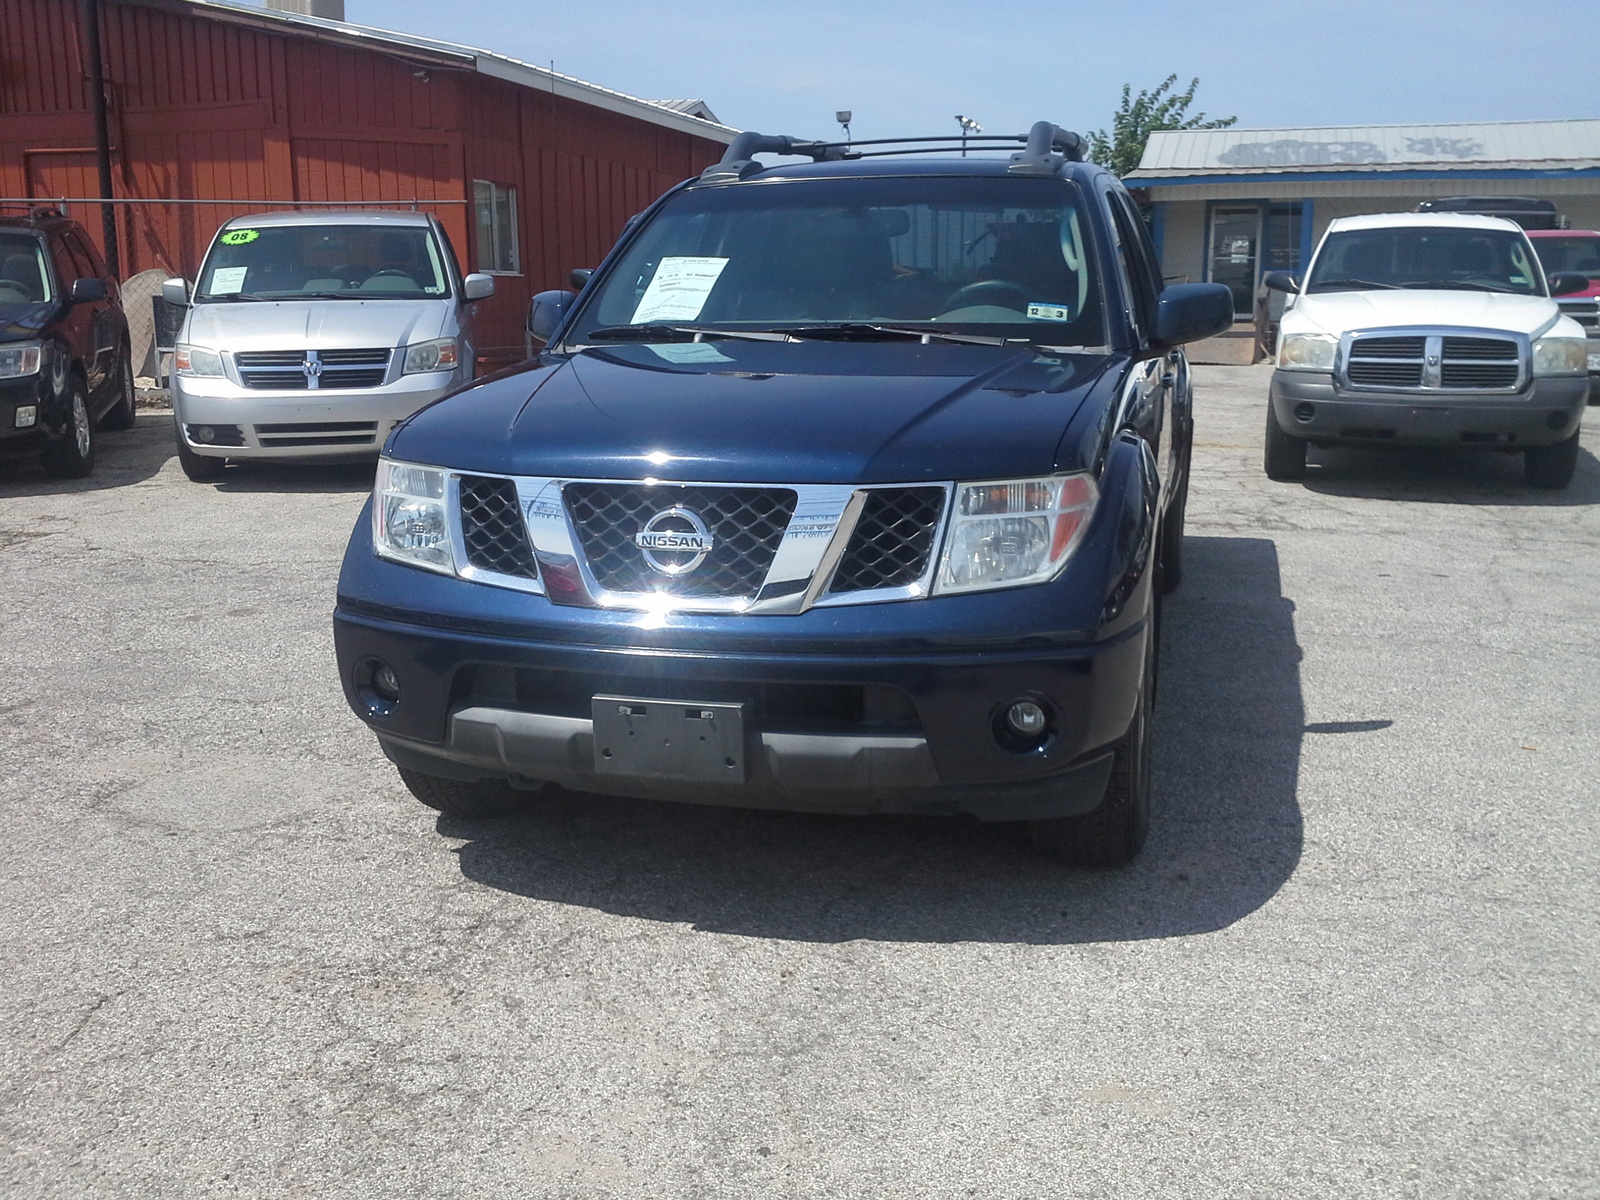 2006 Nissan frontier nismo king cab #3